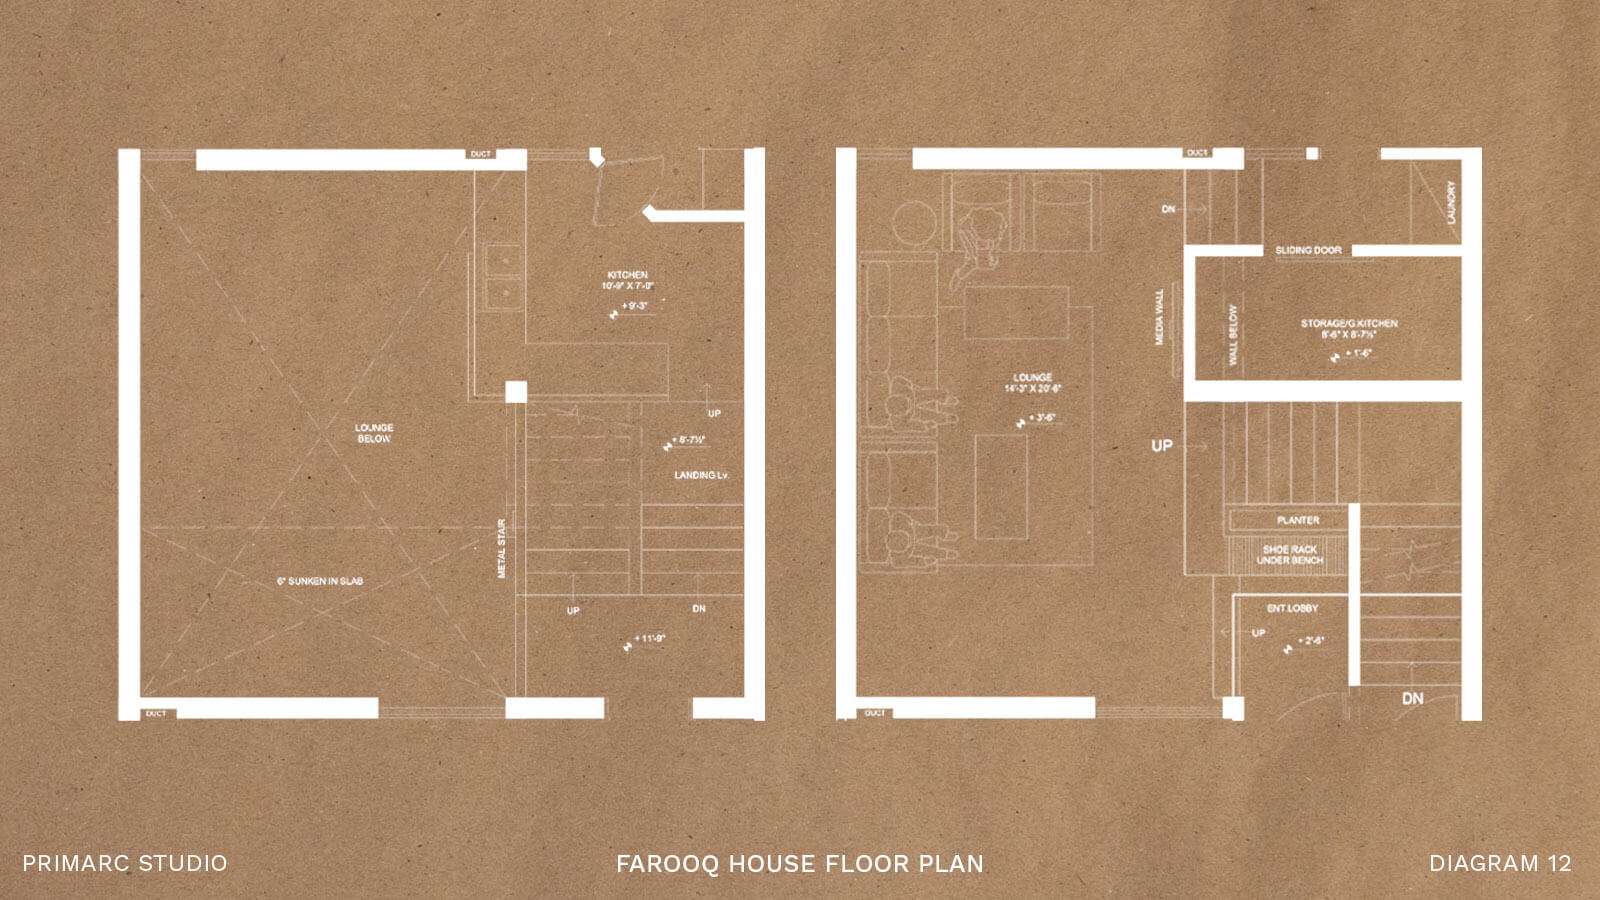 Ground floor and First floor plans